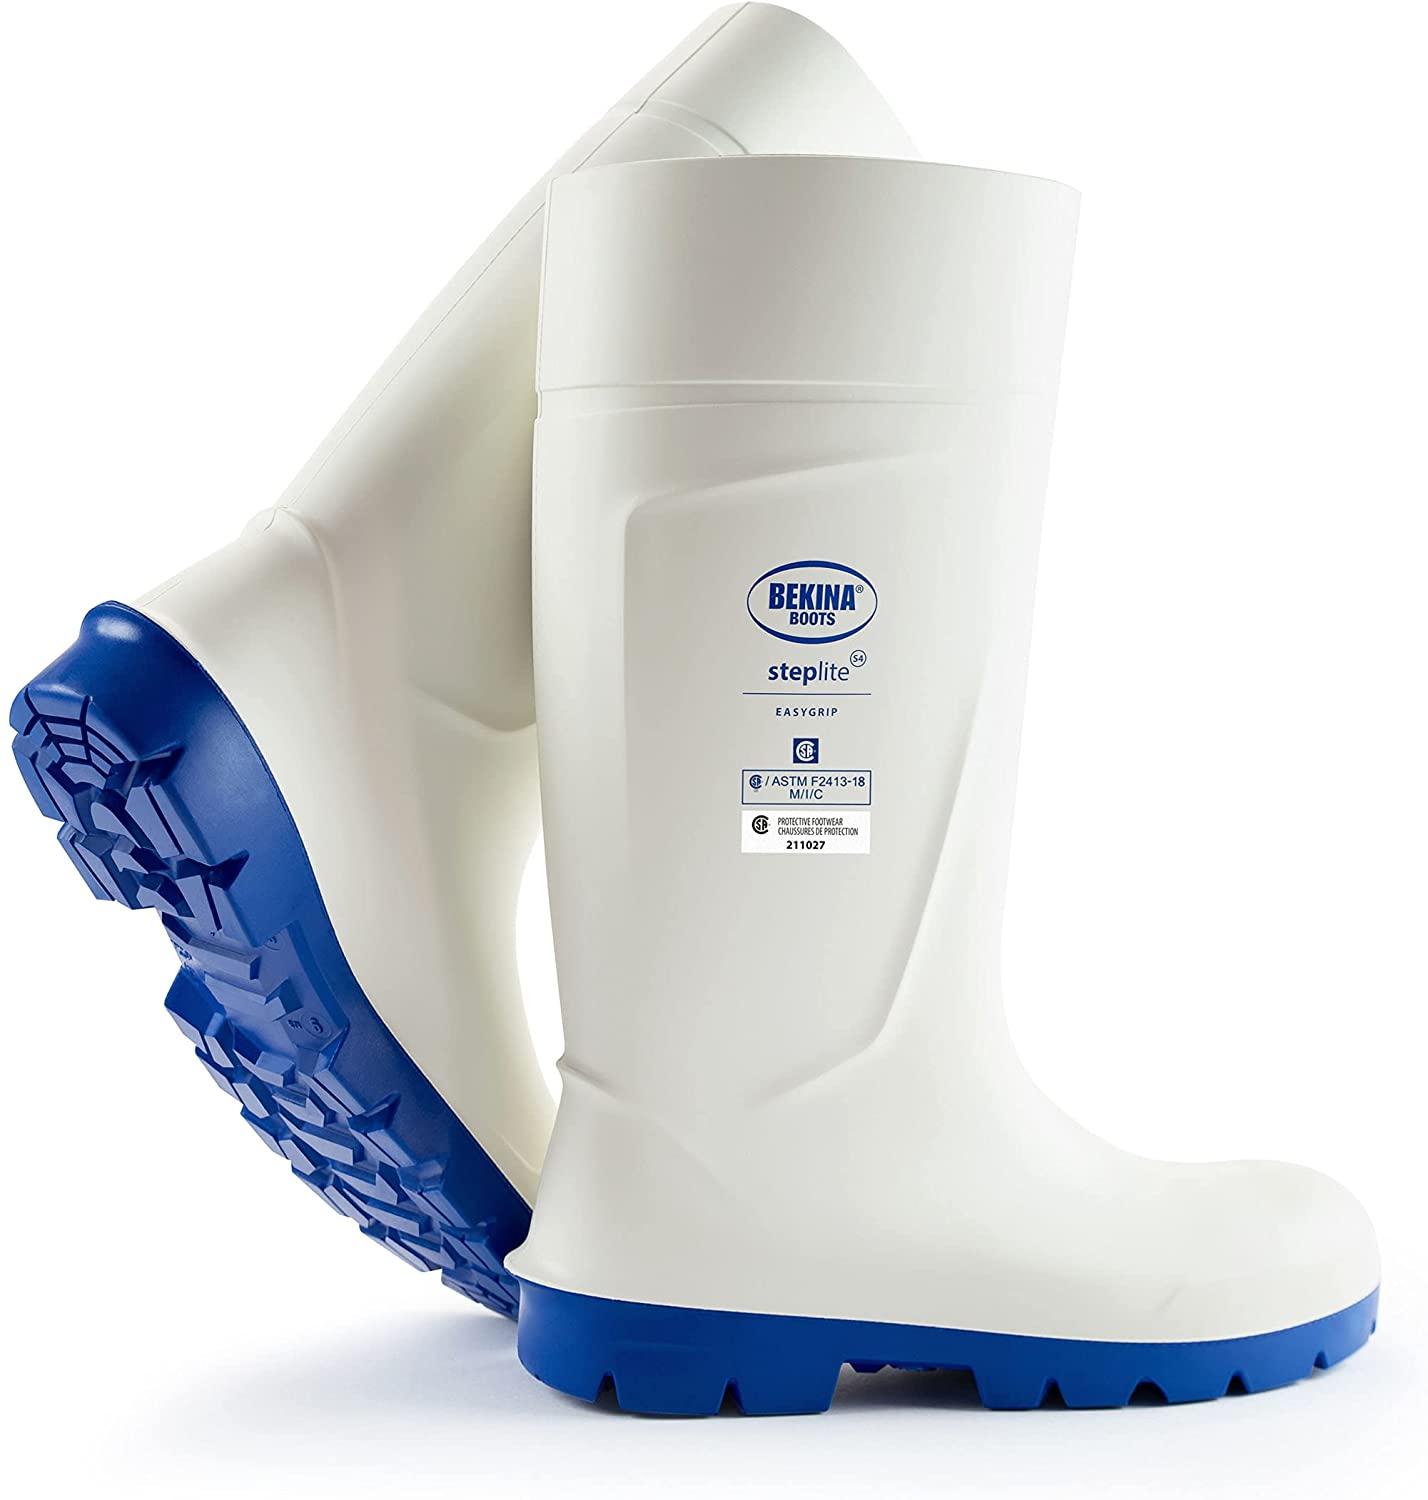 Steplite Easygrip S4 Metal Safety Toe Cap Work Boots in white/blue from the side view